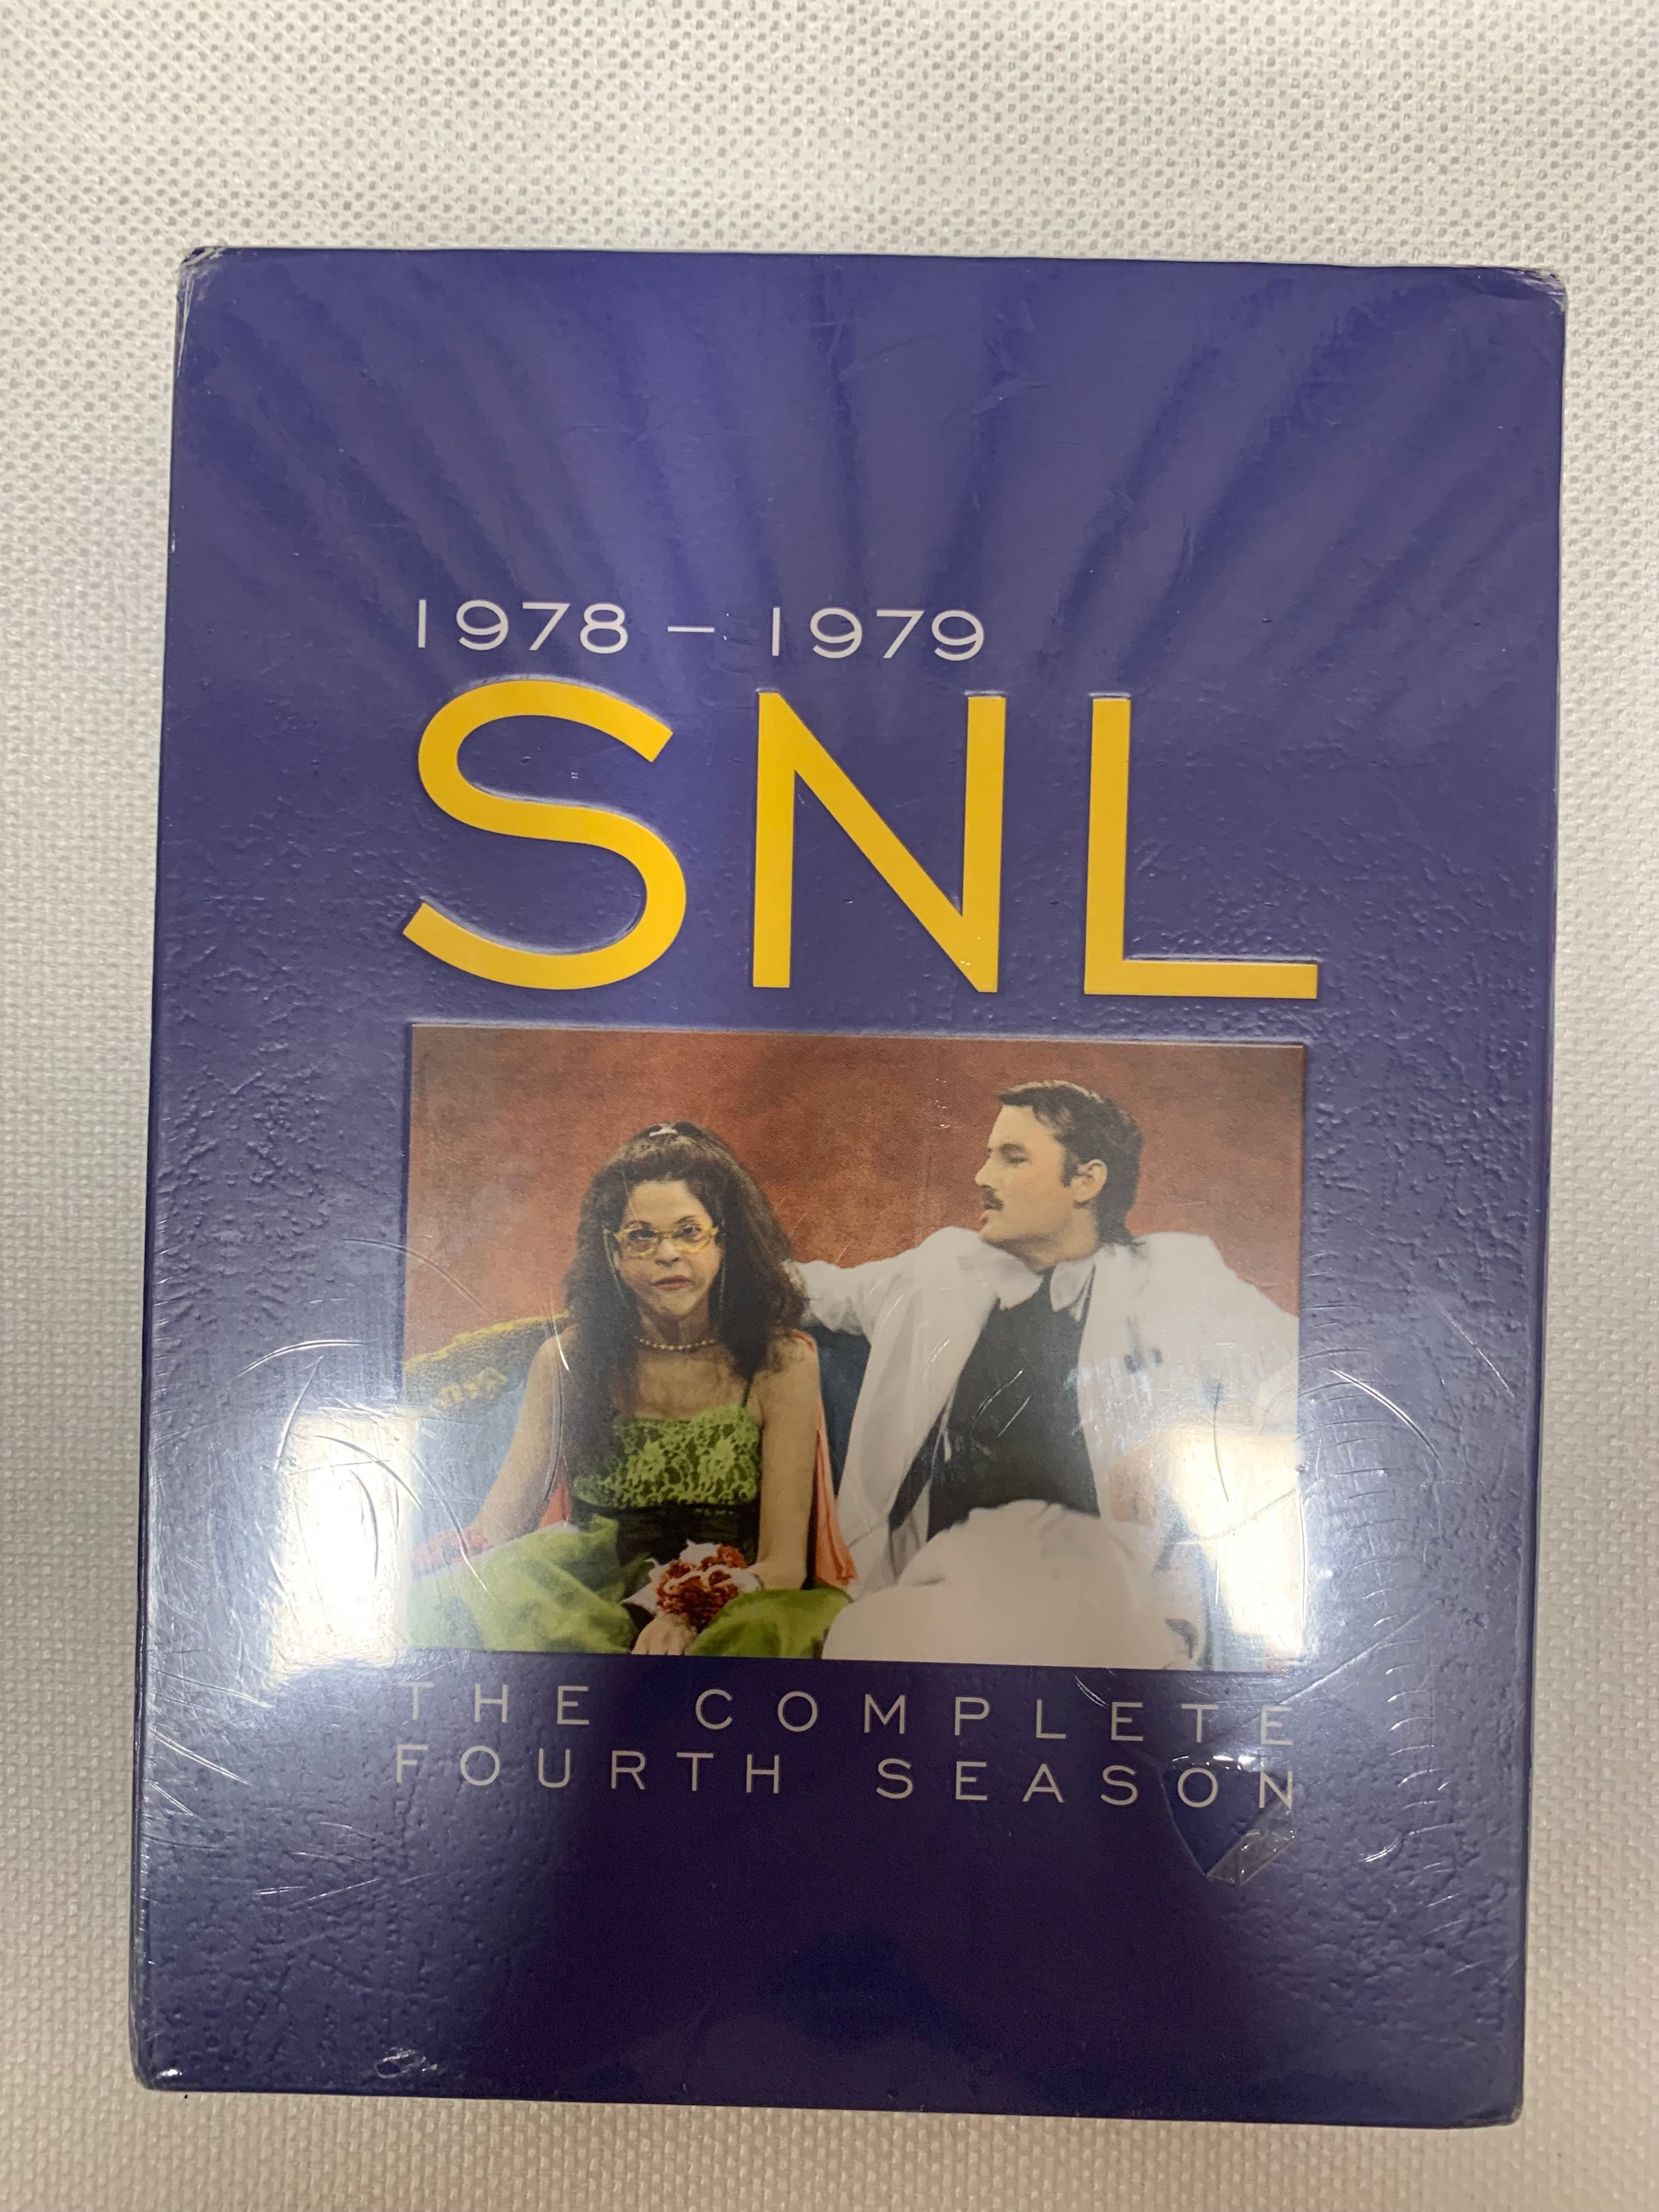 Saturday Night Live Seasons Two thru Five Complete DVD Collections